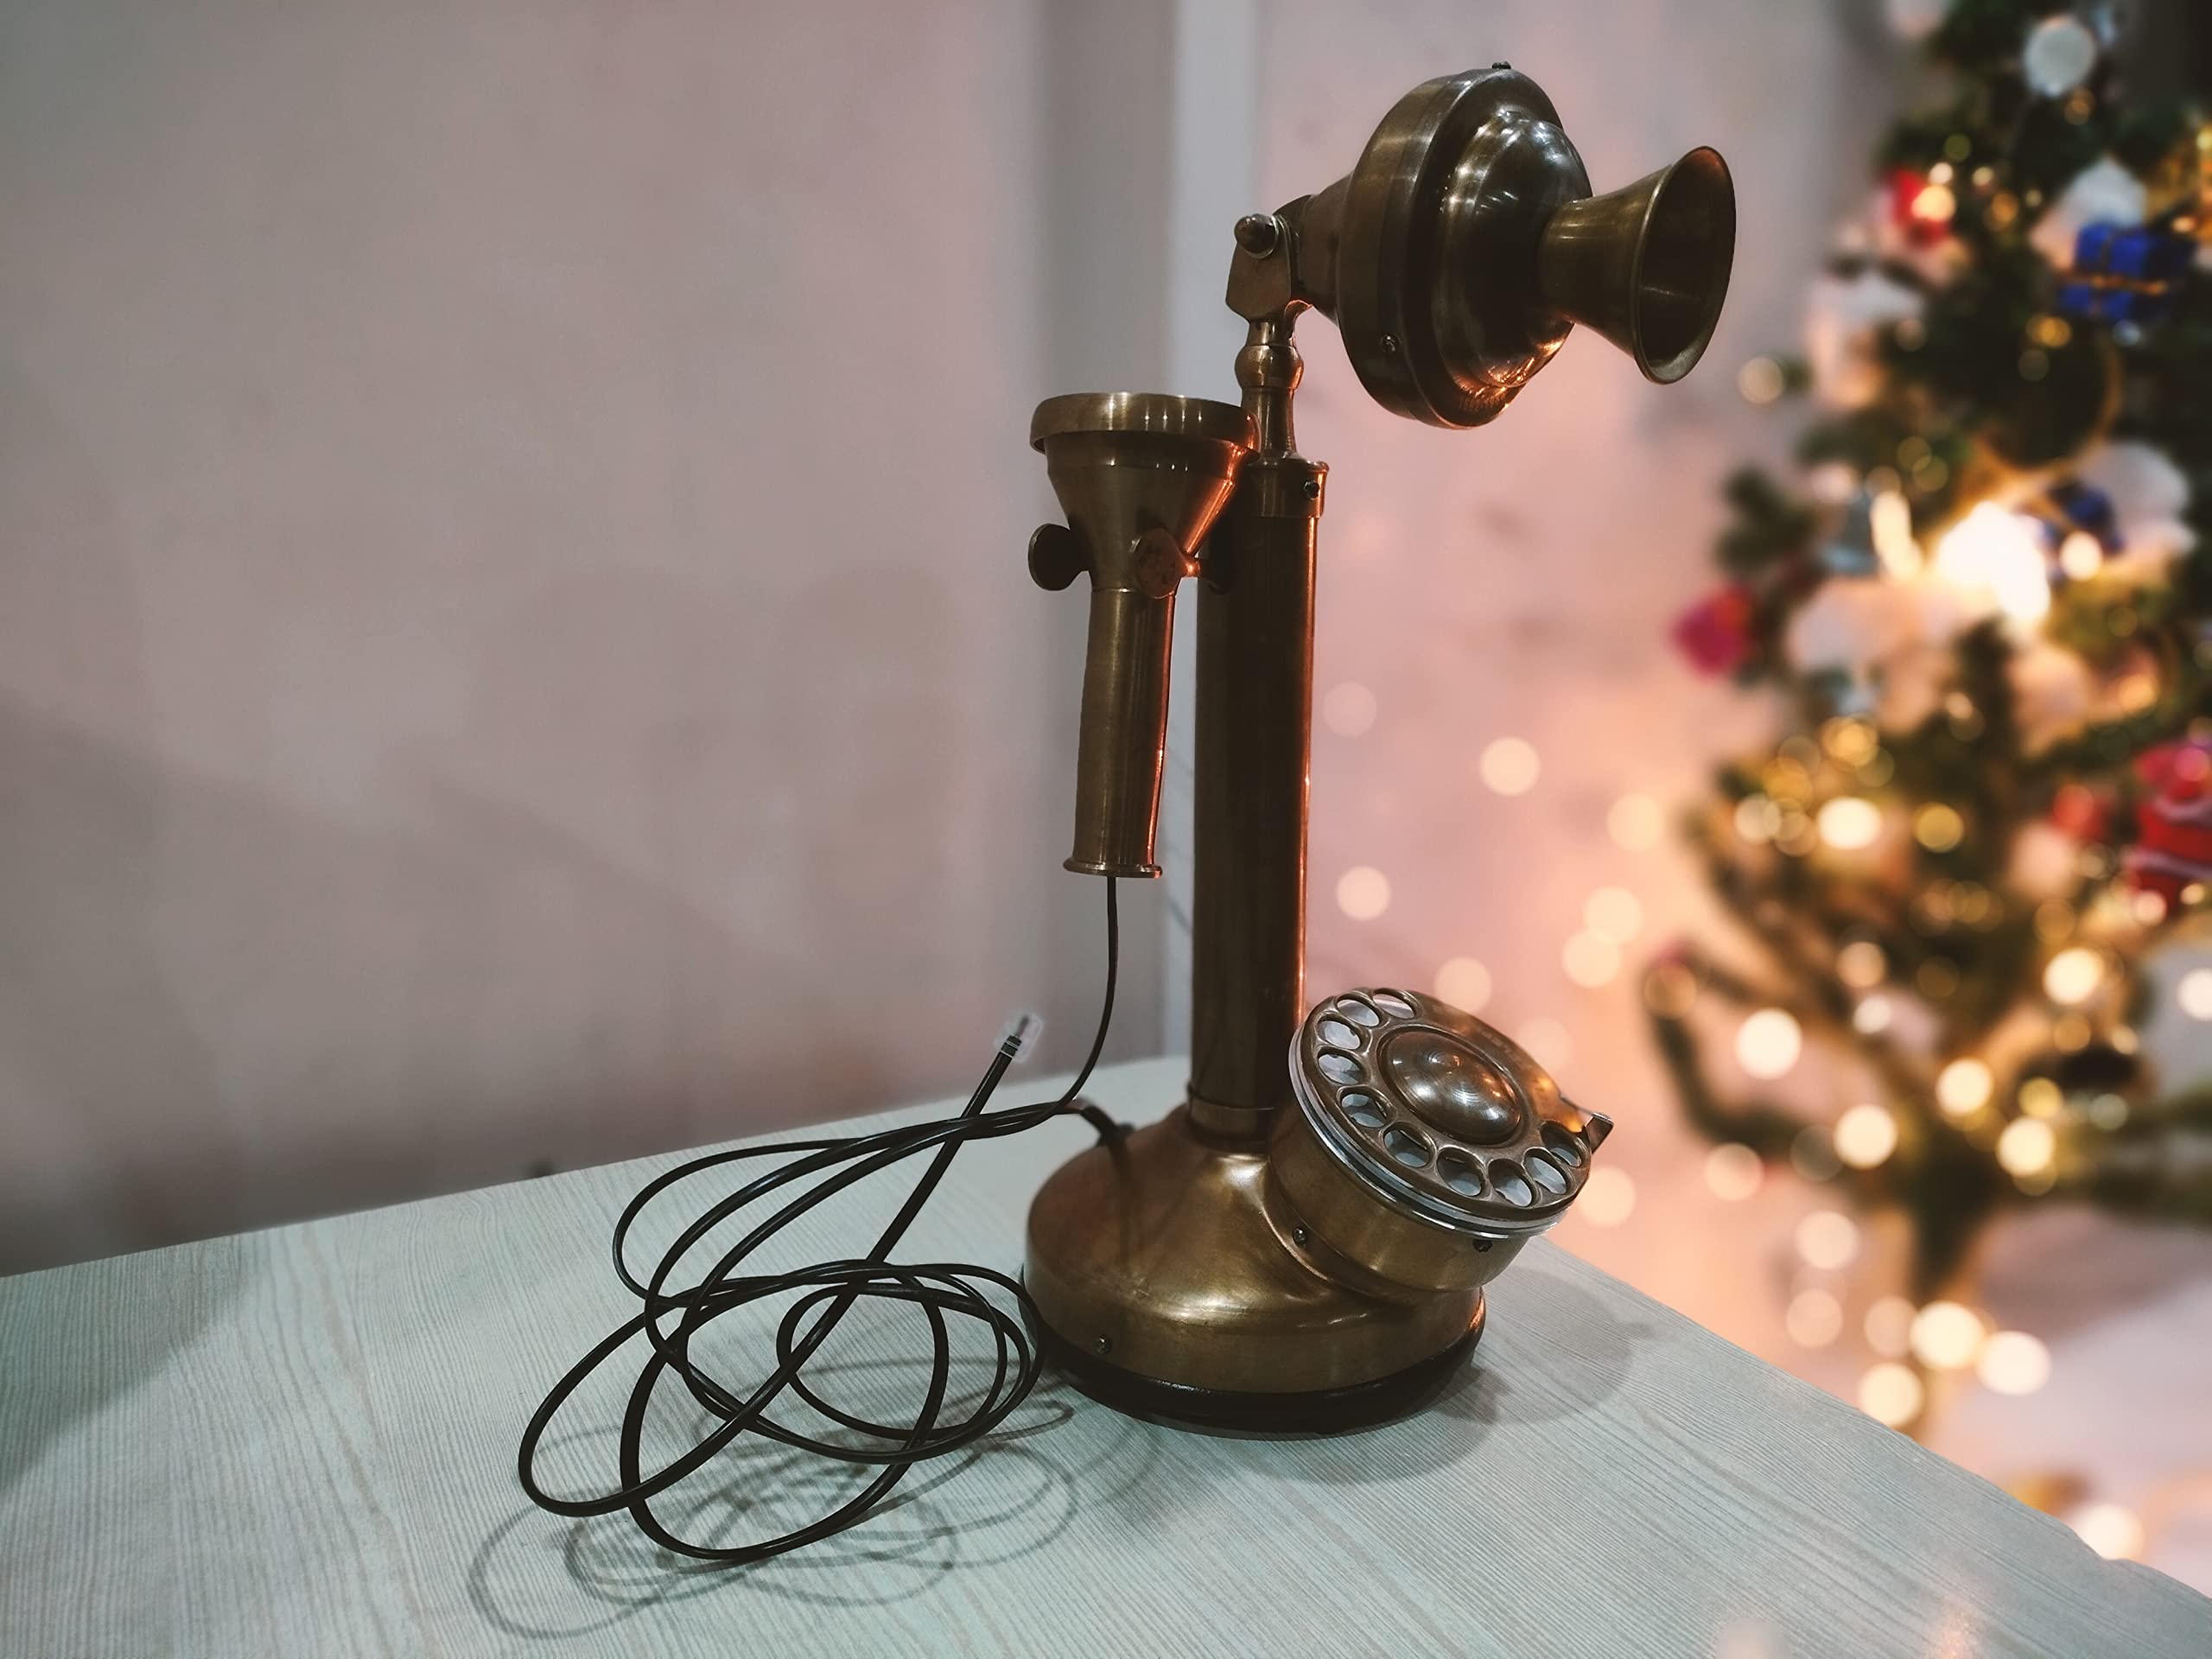 Antique Western Electric Bell Telephone Brass Candlestick Phone Replica Electronic Corded Rotary Dial Phone Home Decor